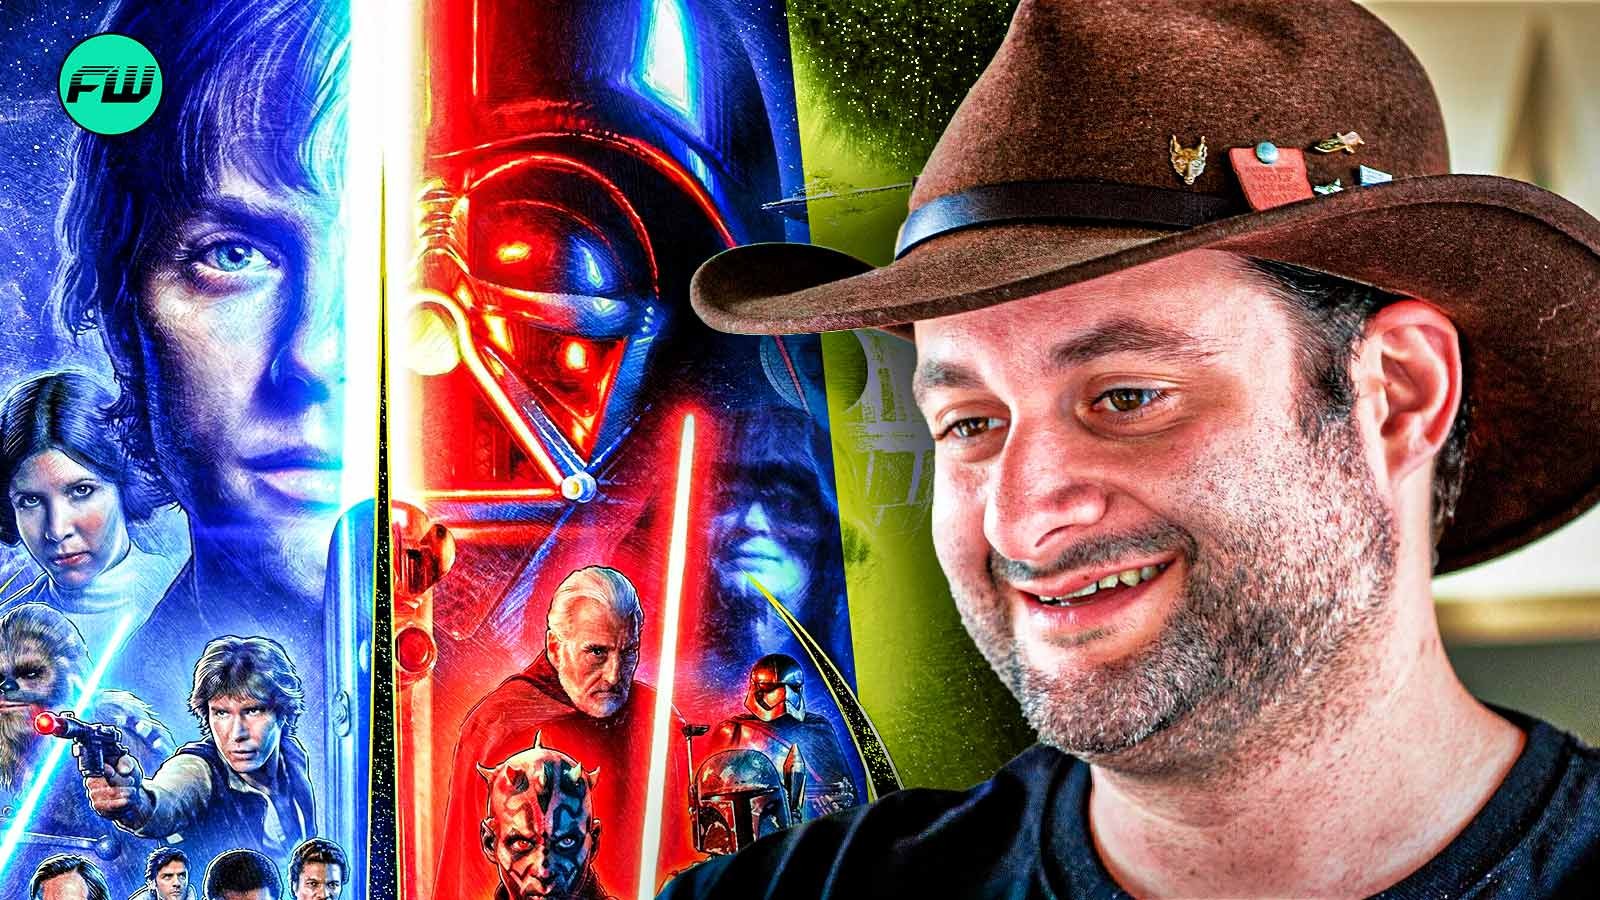 Dave Filoni and Star Wars